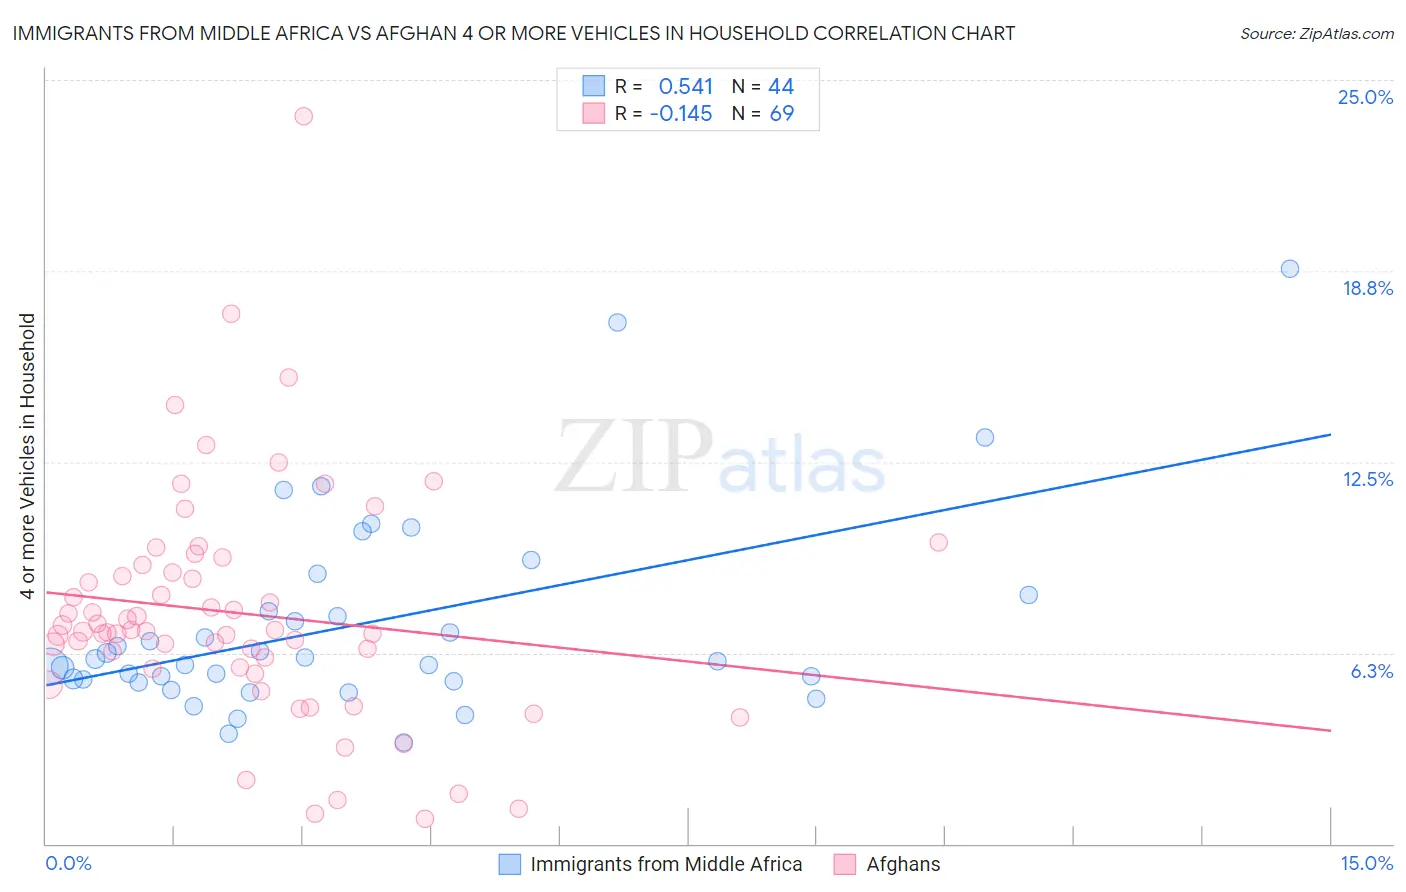 Immigrants from Middle Africa vs Afghan 4 or more Vehicles in Household